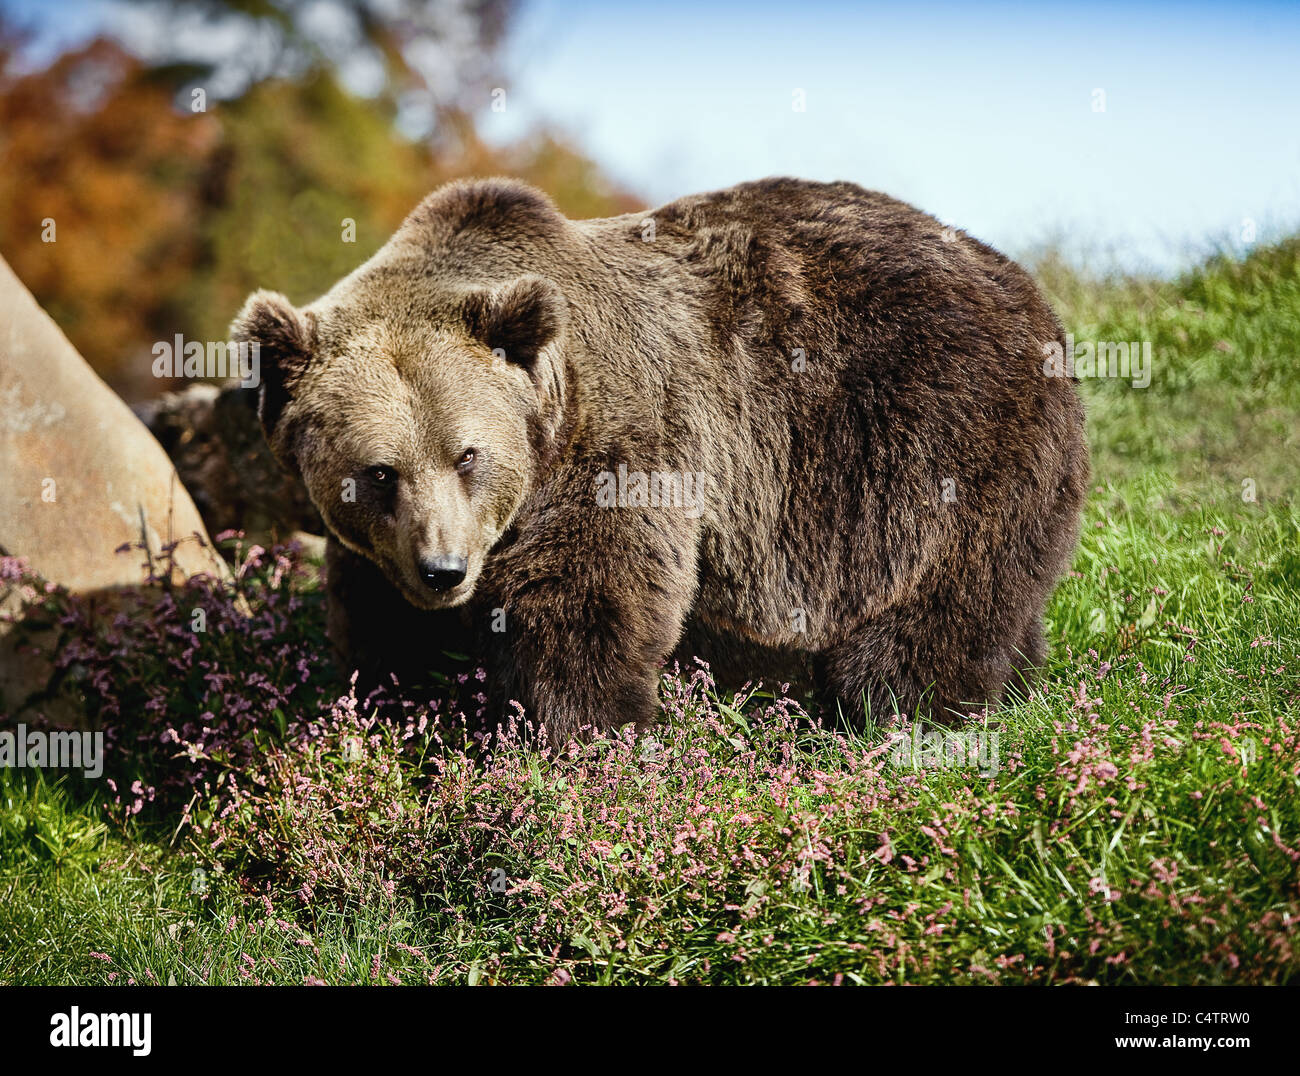 LARGE GRIZZLY BEAR ON GRASS LOOKING MENACINGLY AT CAMERA Stock Photo